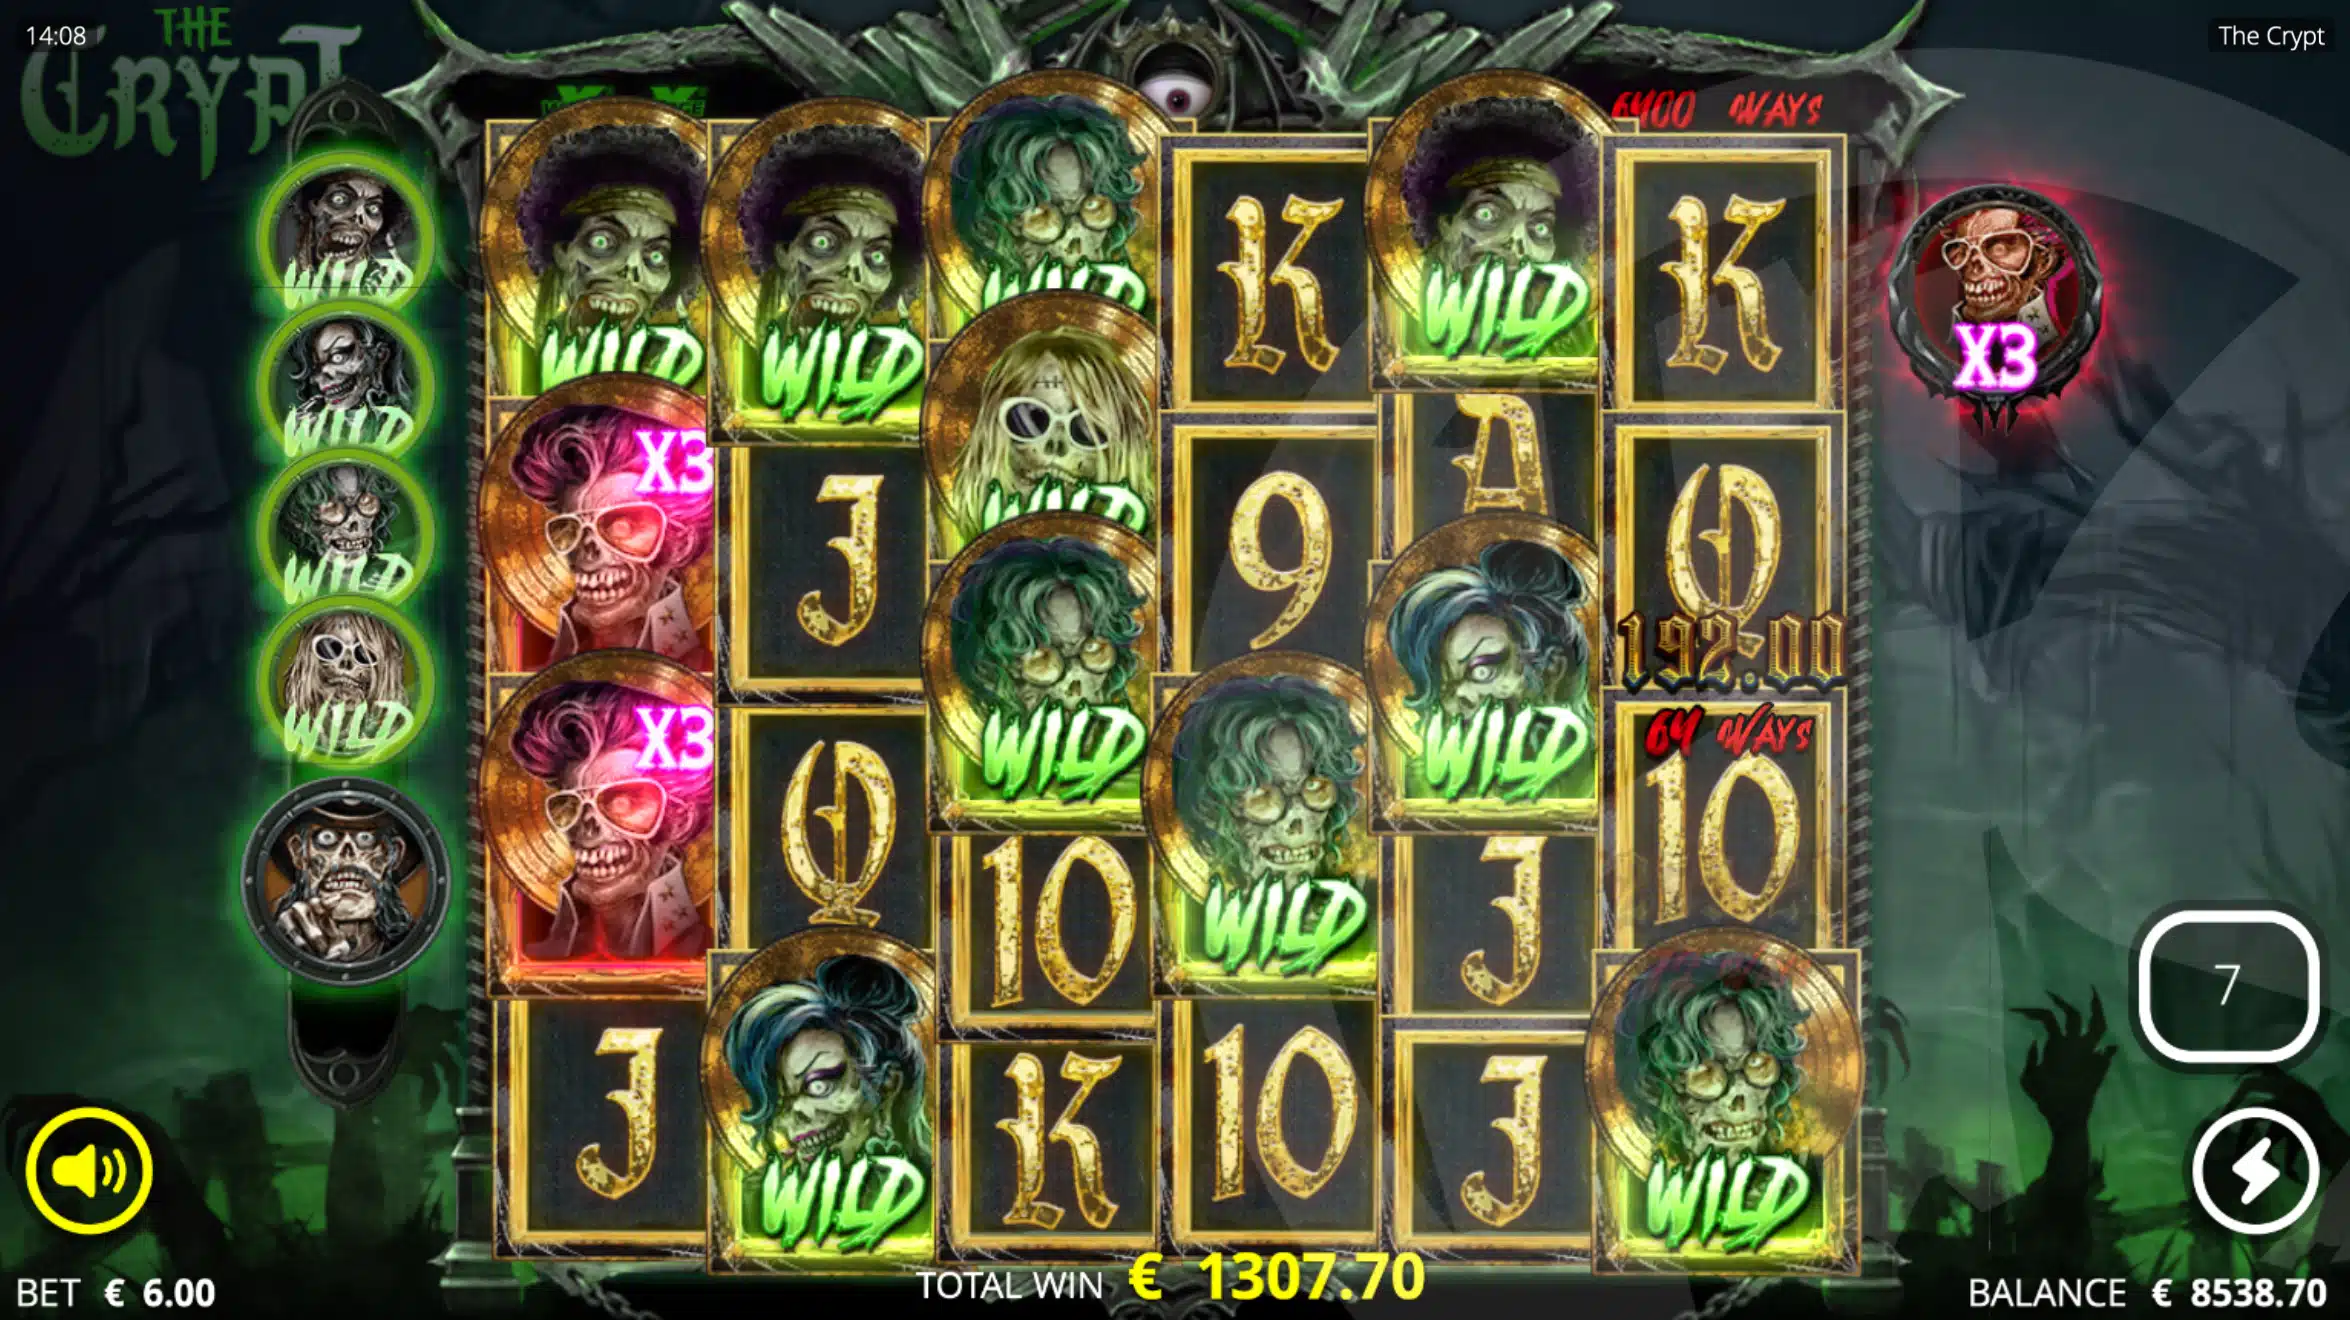 All Dead Legends Can be Turned Wild in Free Spins